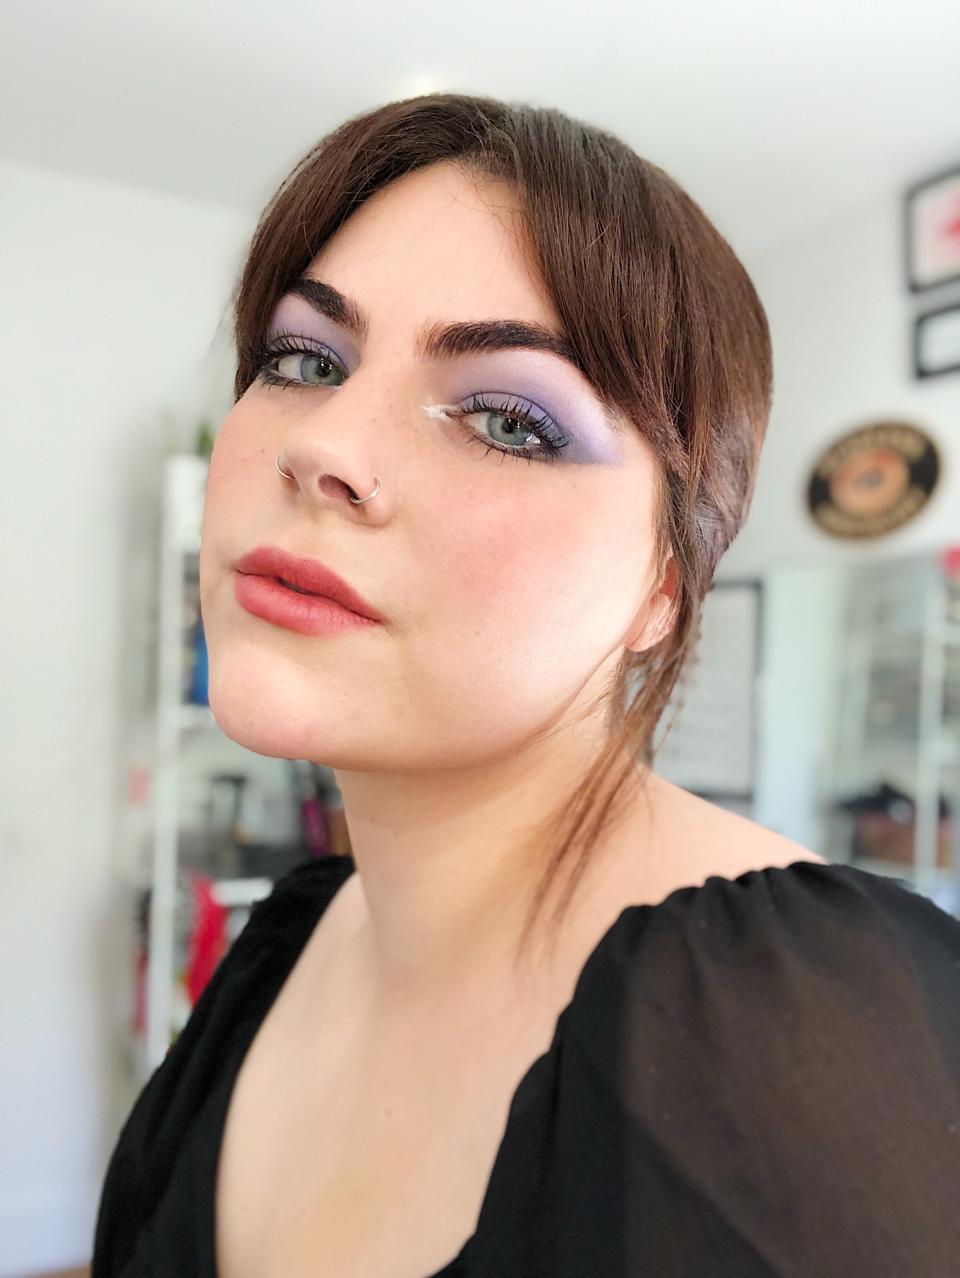 Staff writer Nicola Dall'Asen Wears Urban Decay x Prince Let's Go Crazy Eye Shadow Palette, Kajal Eyeliners, and Liquid Highlighter.